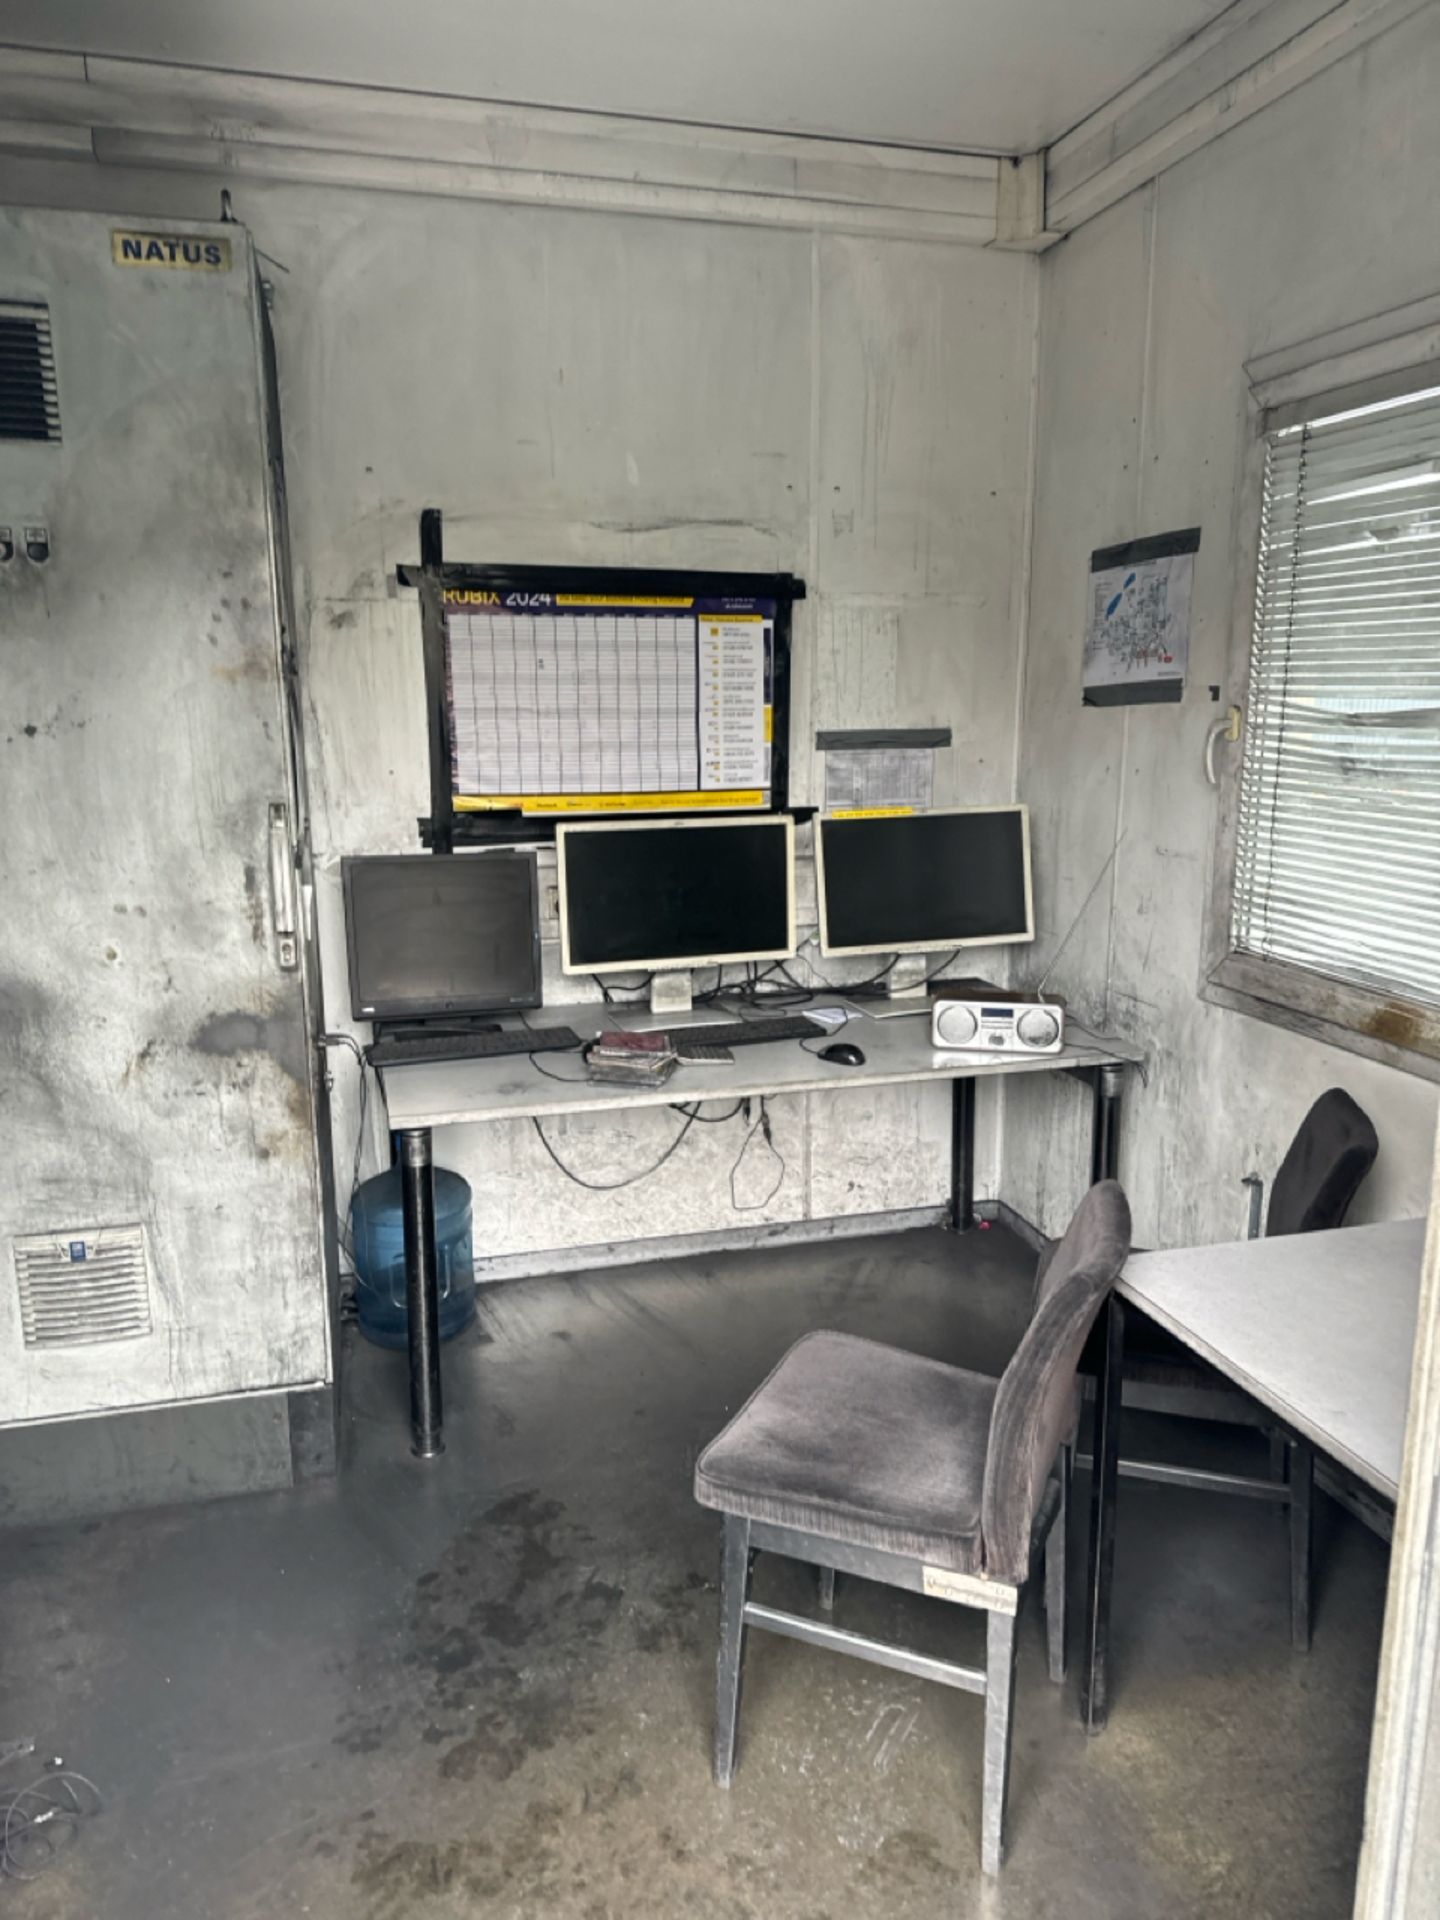 Air conditioned Raised Mobile Office / Cabin - Image 11 of 19